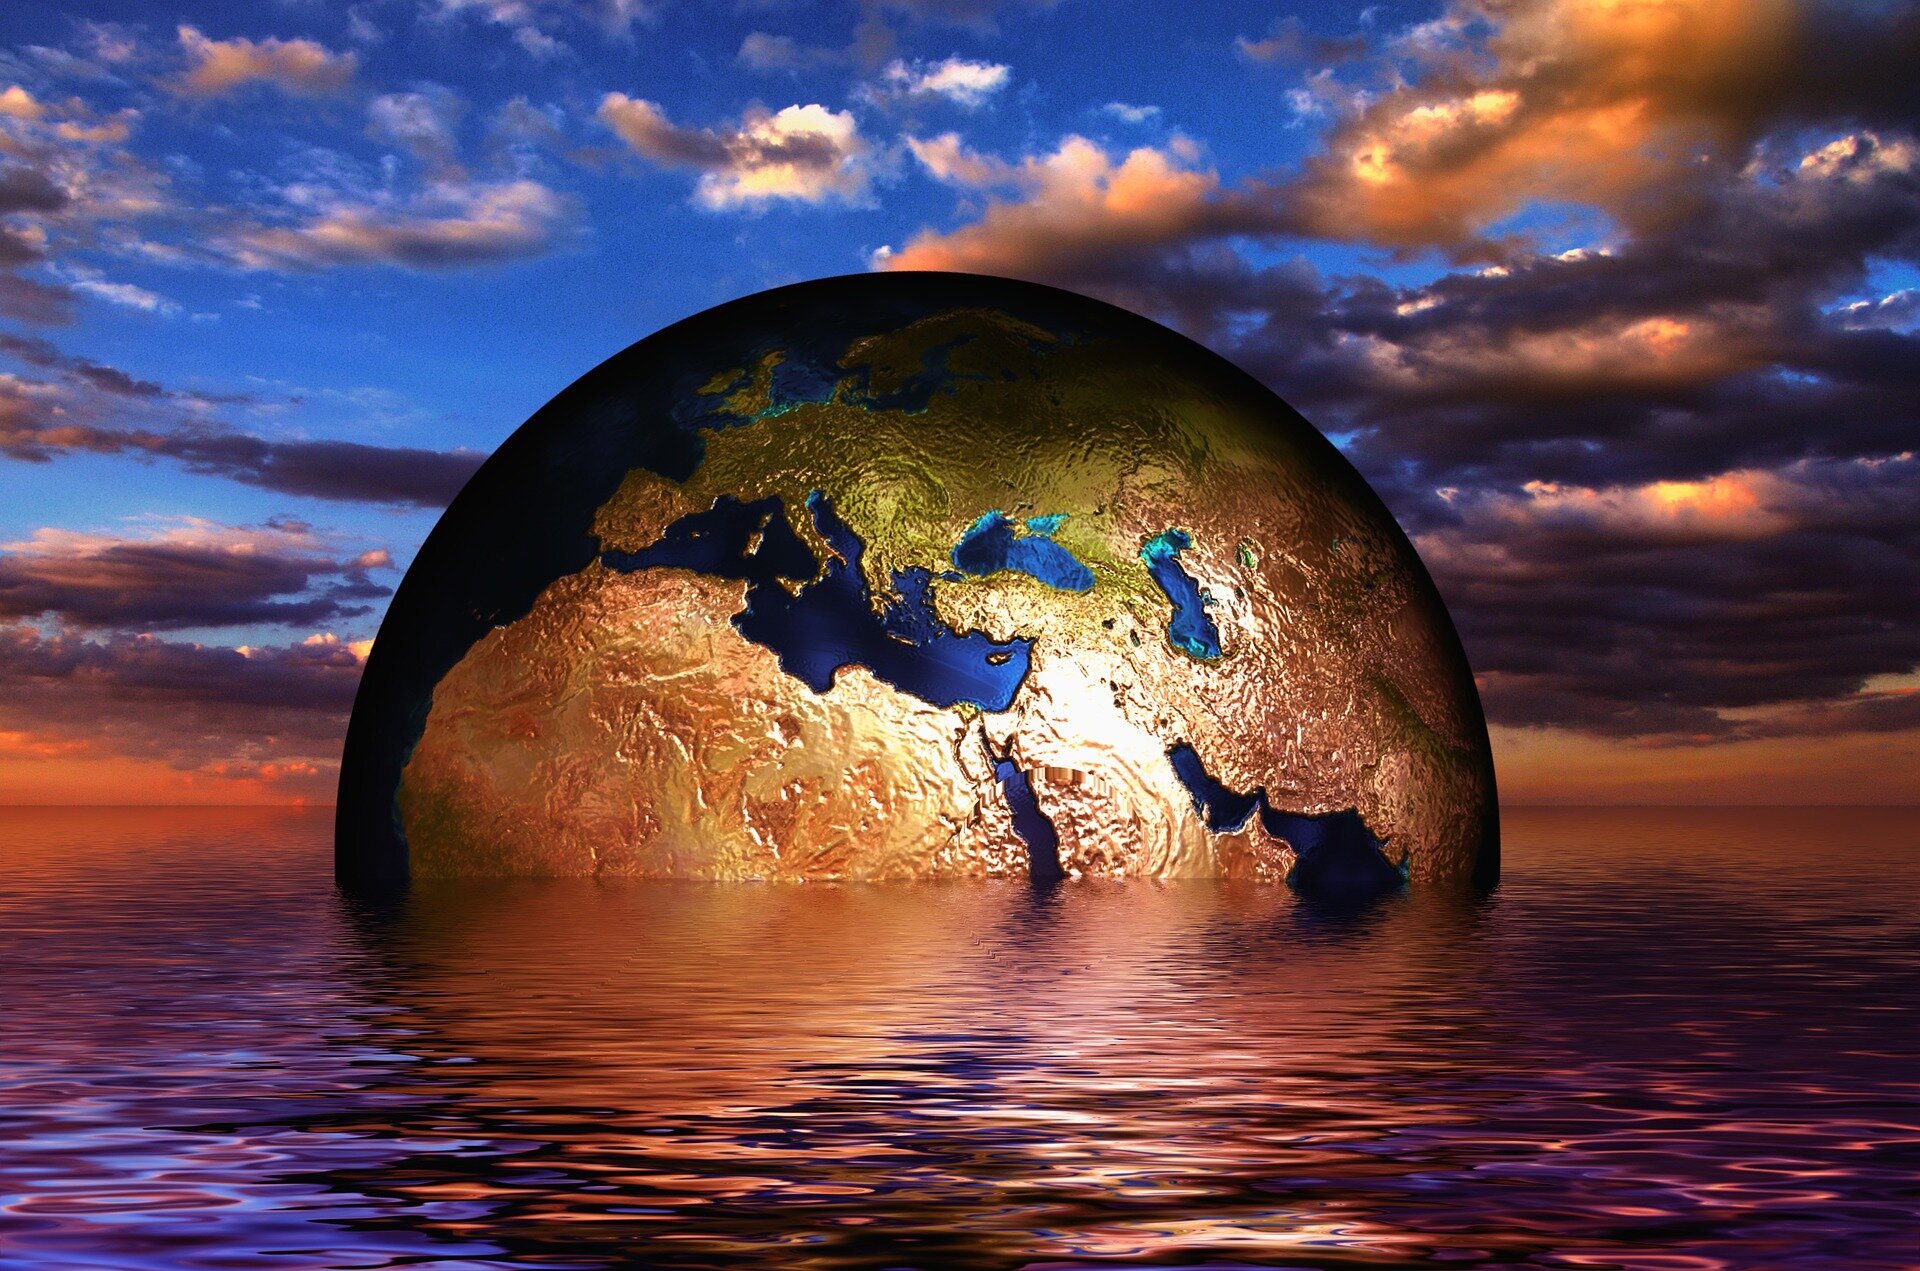 Psychology study unearths ways to bolster global climate awareness and climate action